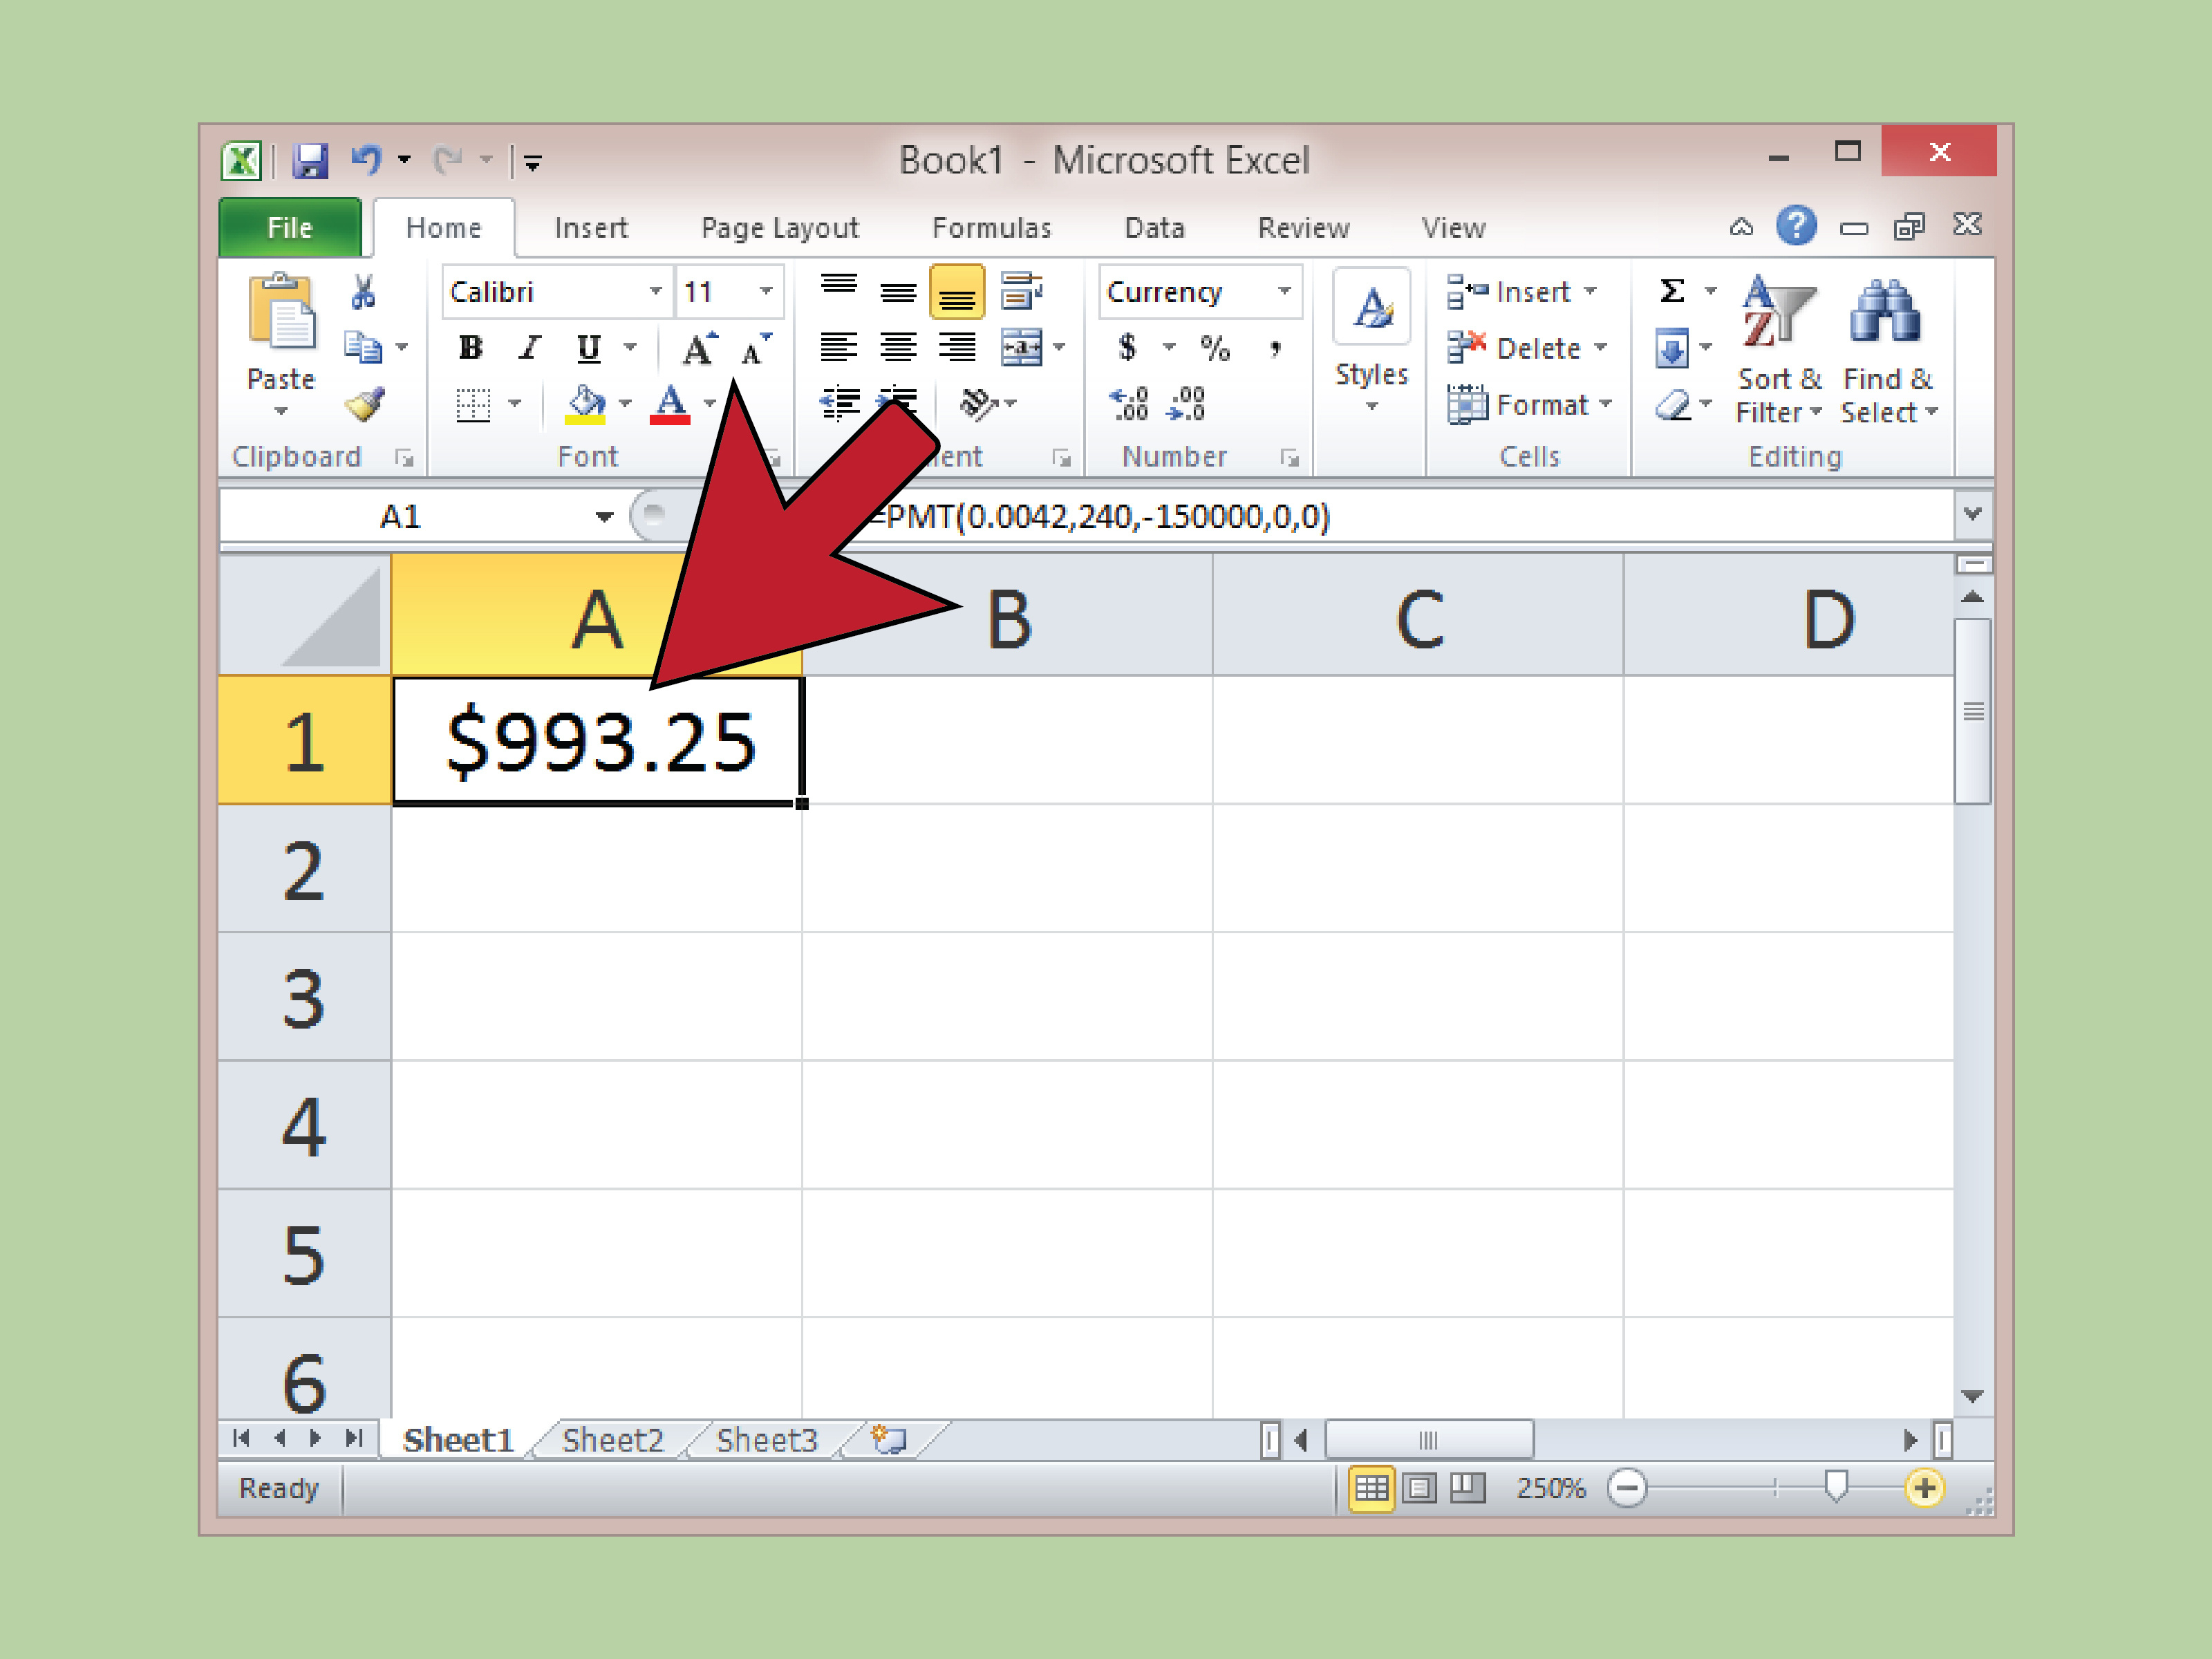 Microsoft Excel Spreadsheet Instructions In Microsoft Excel Spreadsheet Instructions ...